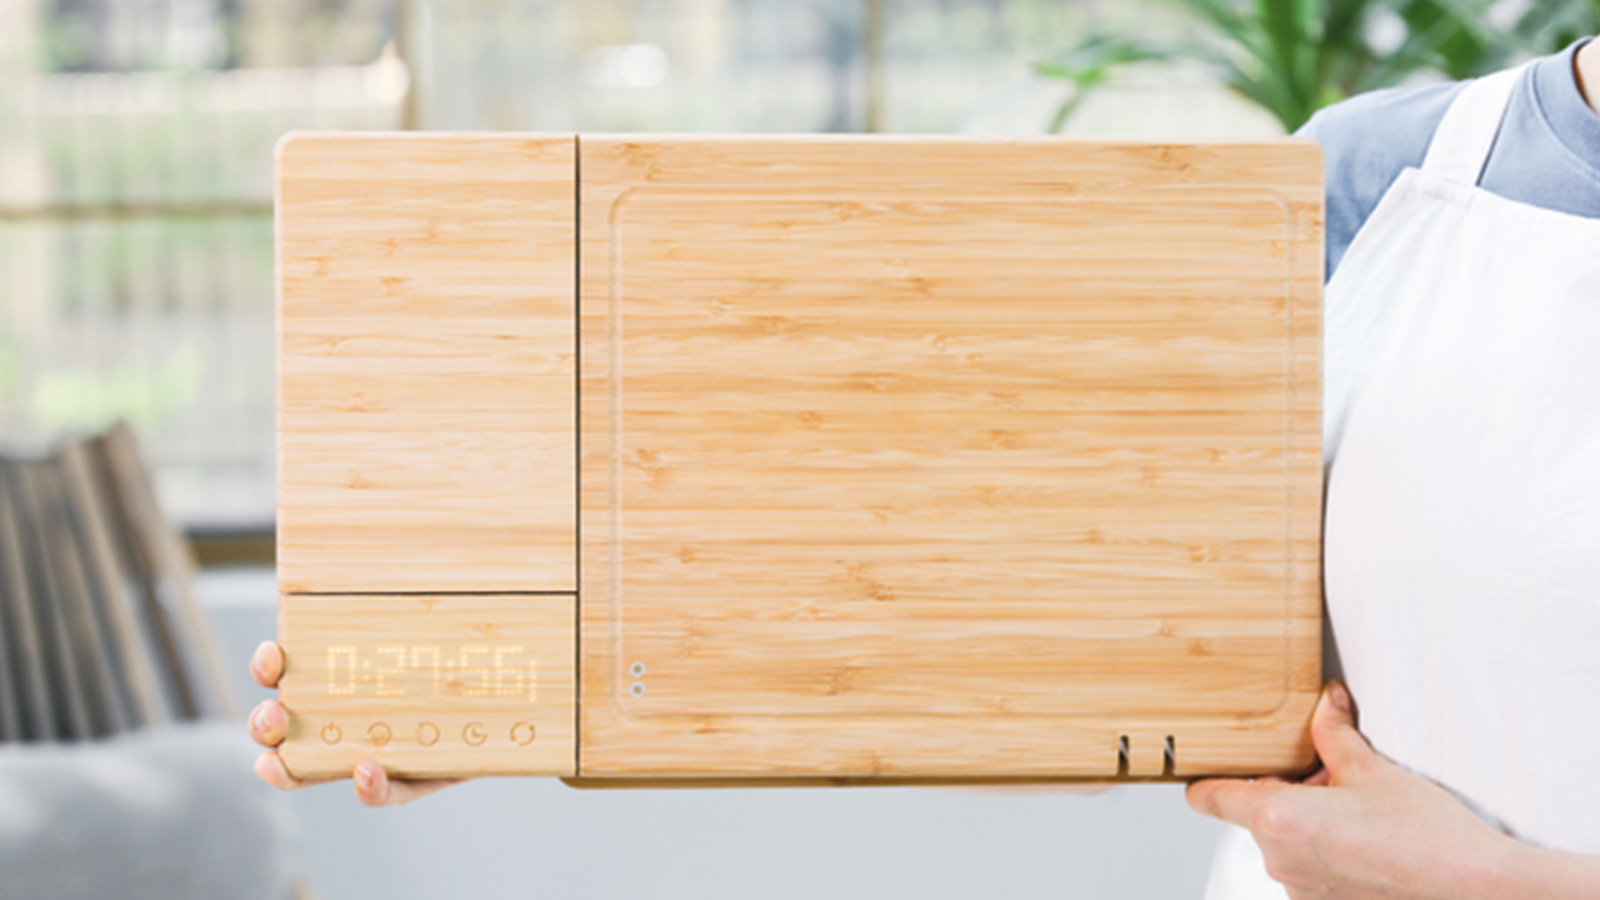 Chopbox: Meal Prep Has Become Much Easier with This Smart Cutting Board -  Tuvie Design